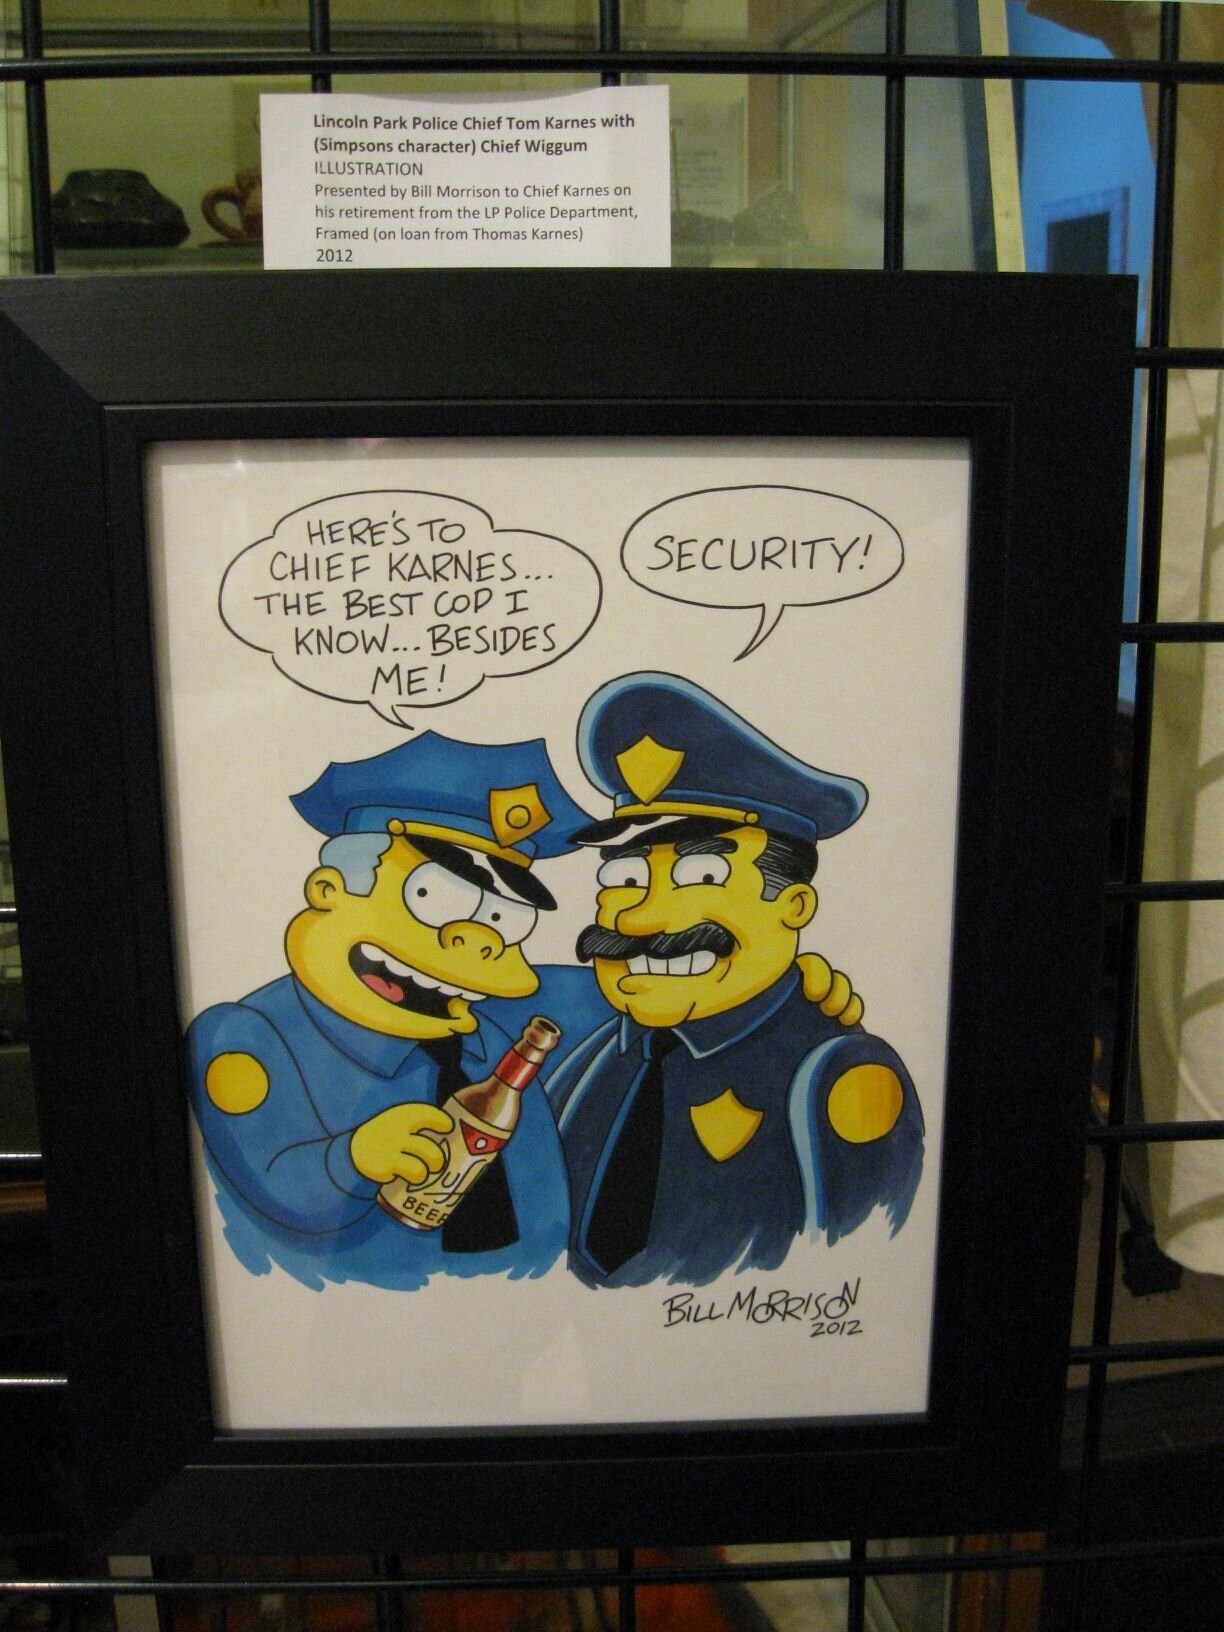 Illustration by Bill Morrison, a gift to former Lincoln Park Police Chief Tom Karnes on his retirement from the police force in 2012; on loan for the exhibit 